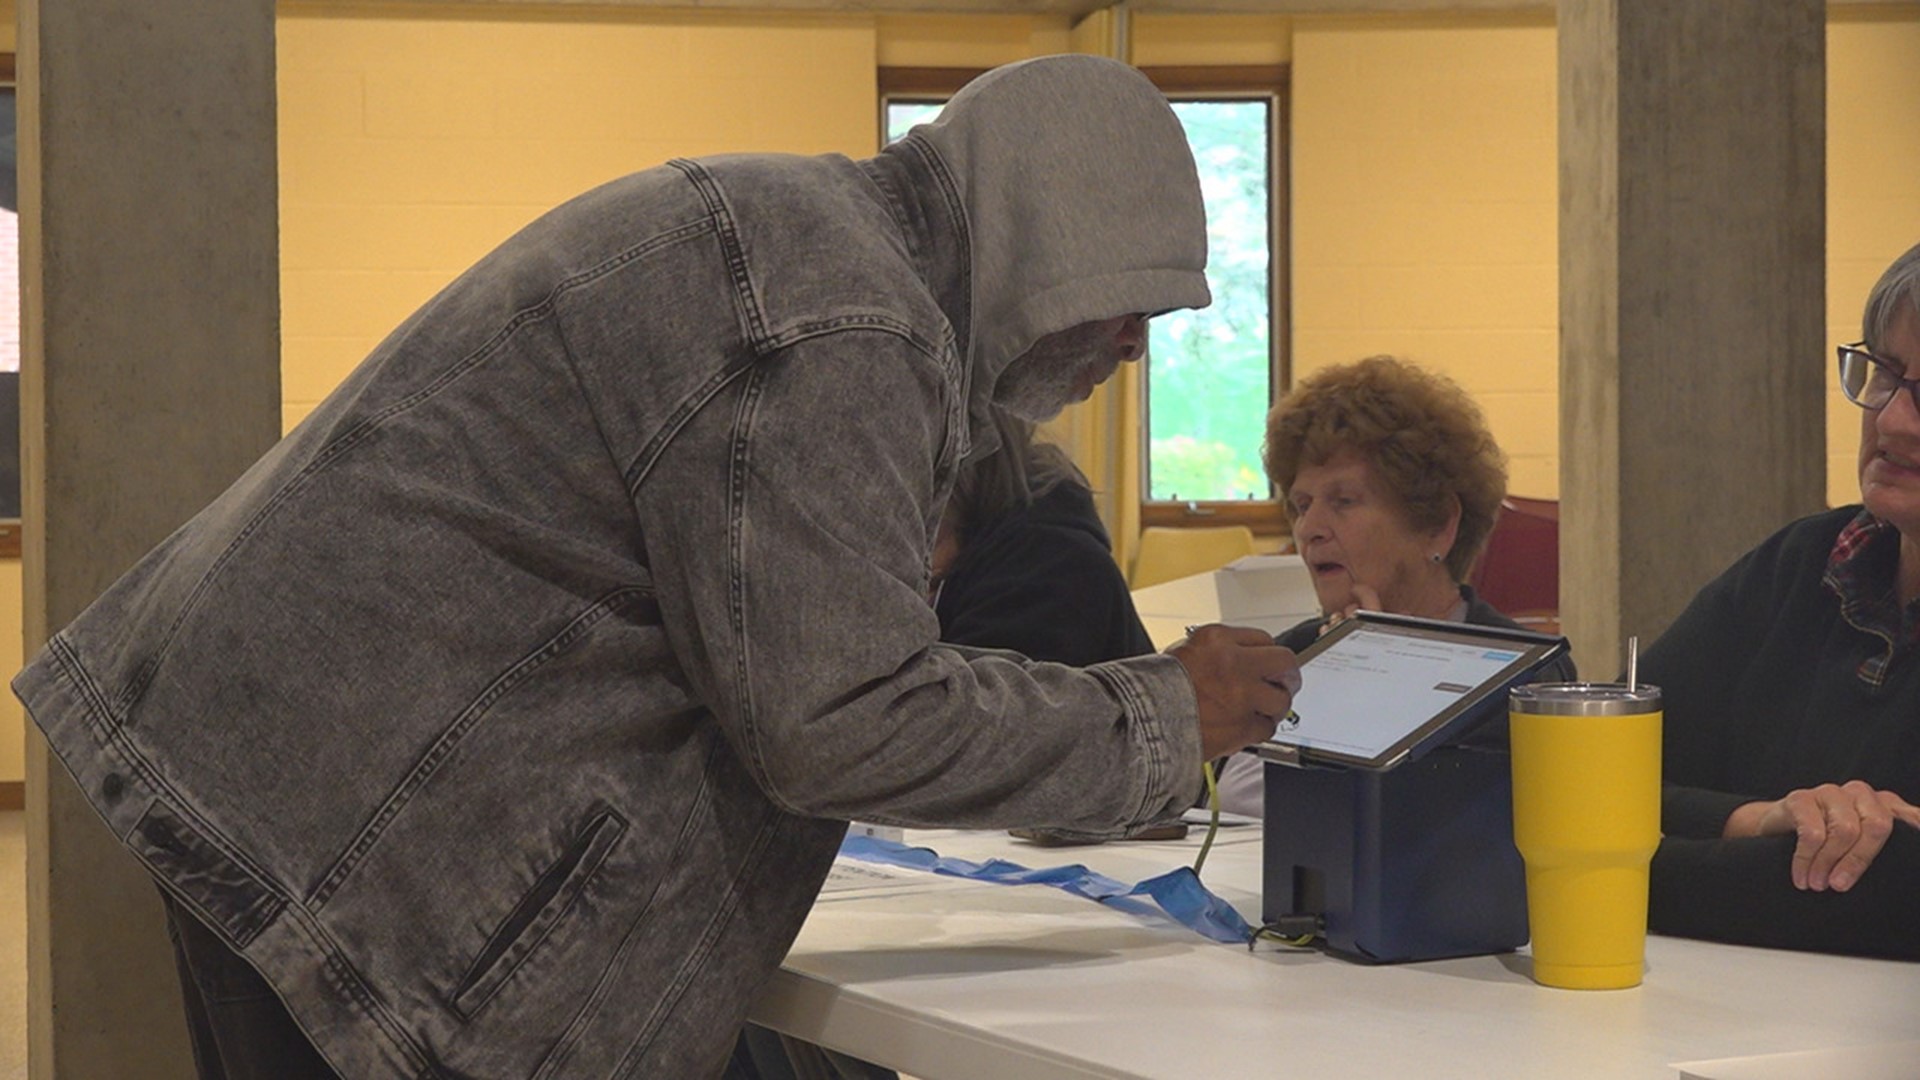 Poll workers at a dozen polling stations signed in voters using E-poll books, as part of a county-wide study to improve wait times.